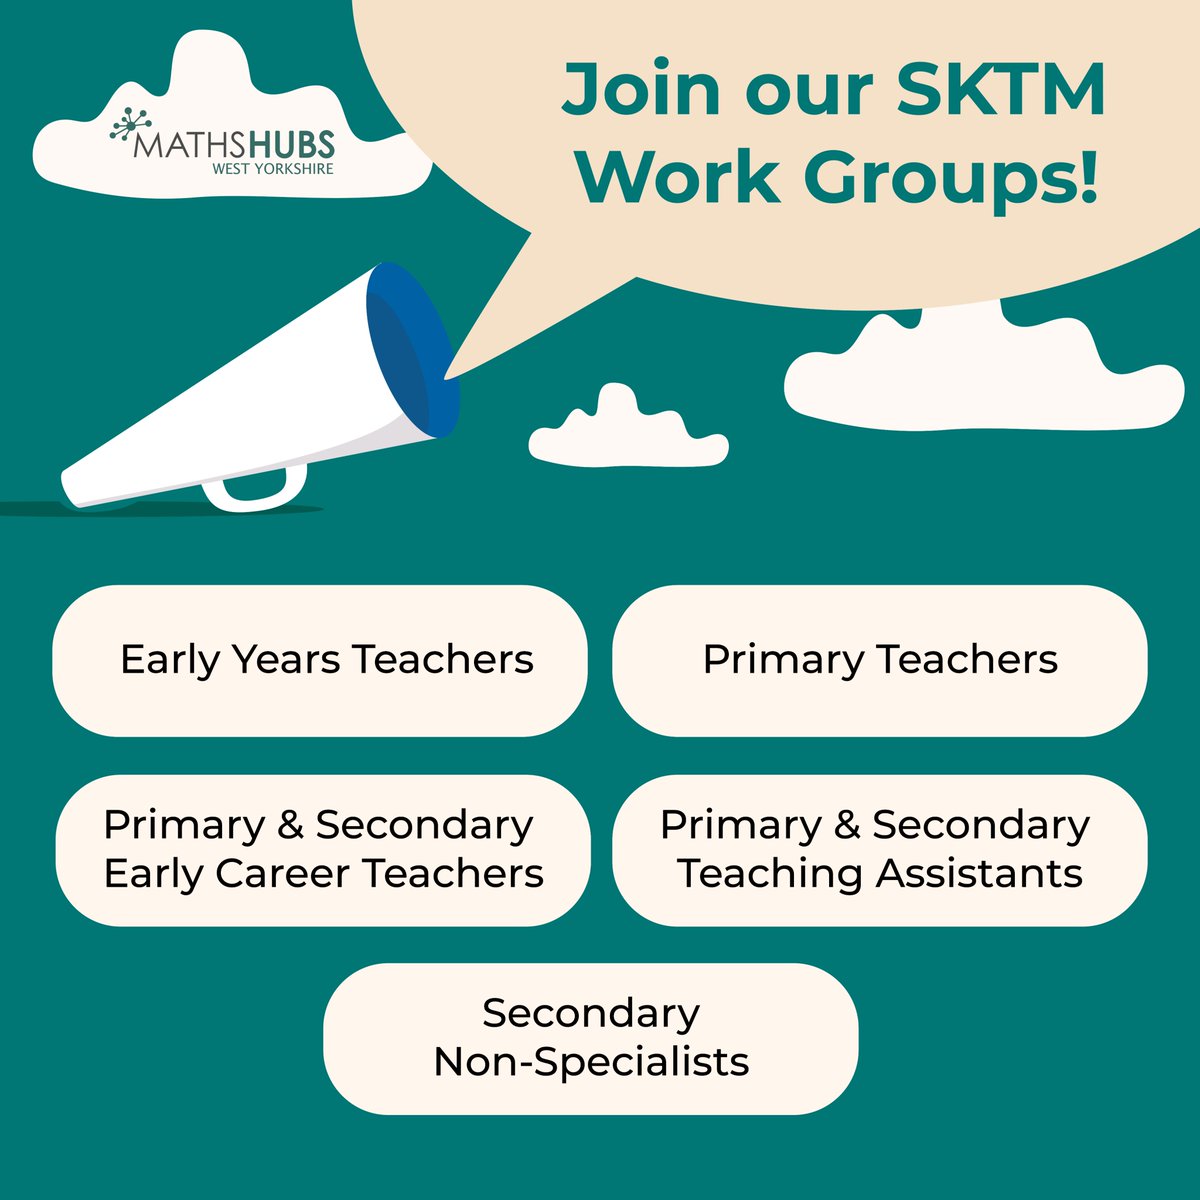 Sign up to our SKTM Work Groups for this academic year. 📆📢 Don't miss out on this incredible opportunity for professional development and collaboration 🌐👥 🔗wymathshub.co.uk/work-groups/ #SKTMWorkGroups #ProfessionalDevelopment #MathsHub